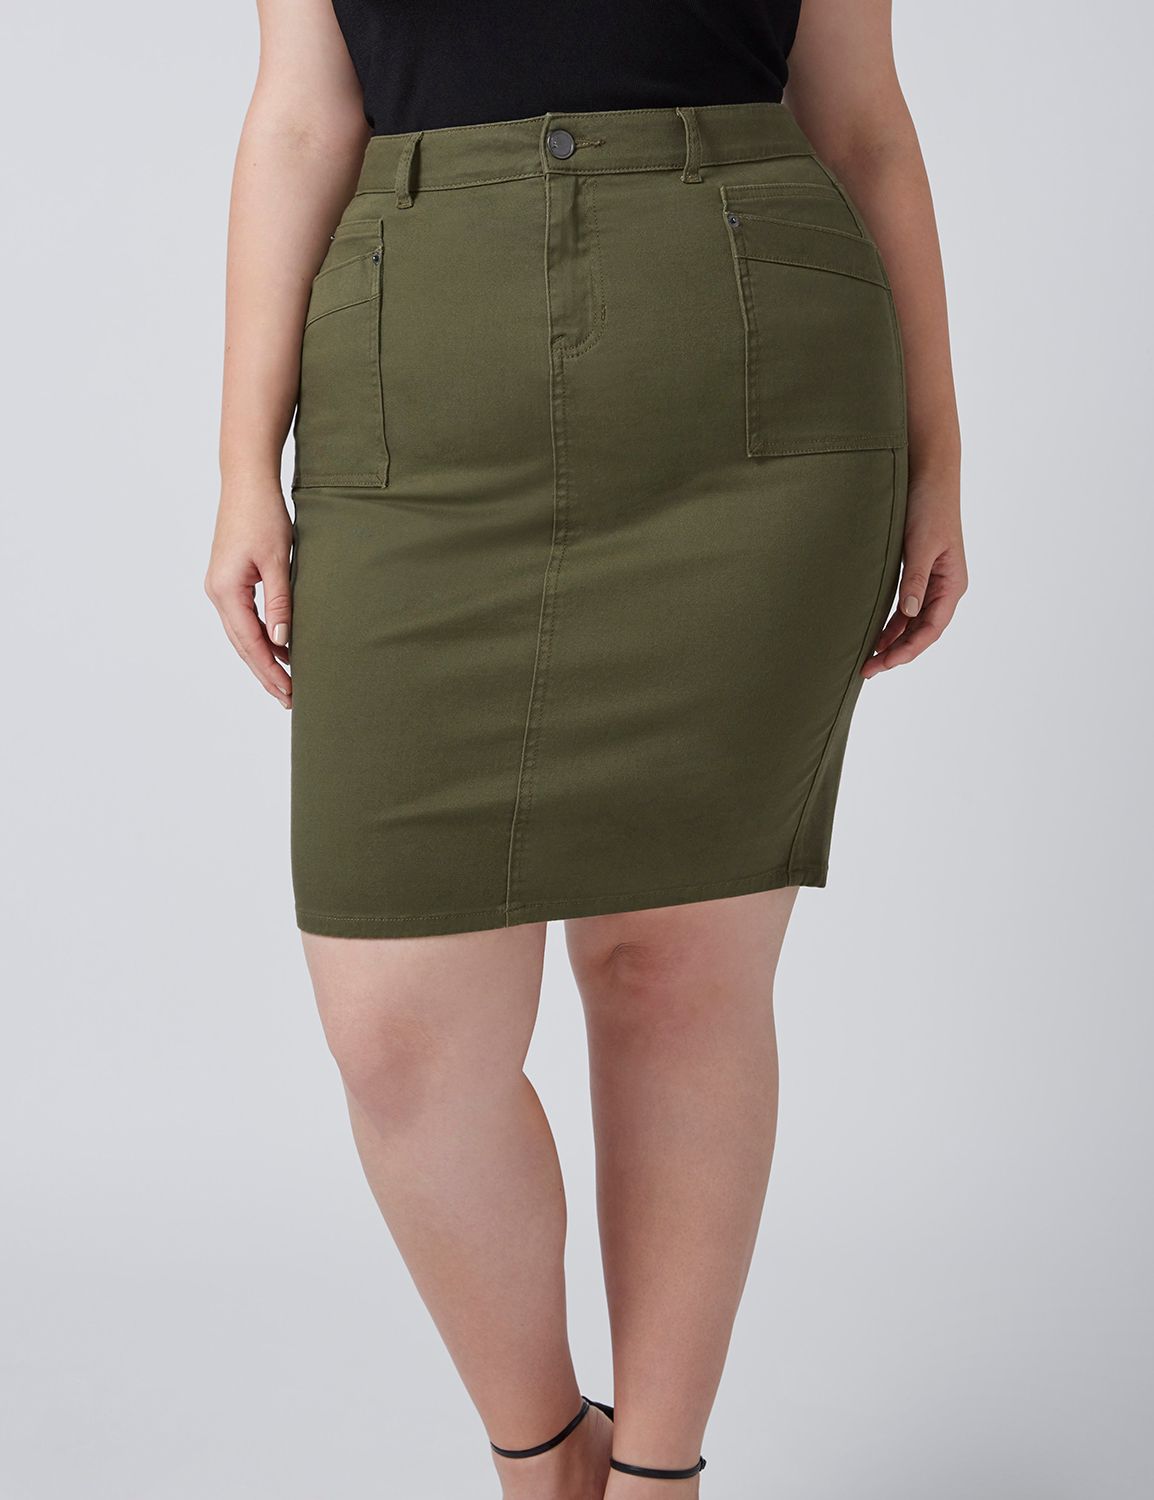 Clearance Plus Size Women’s Dresses & Skirts | Sale and Discount ...